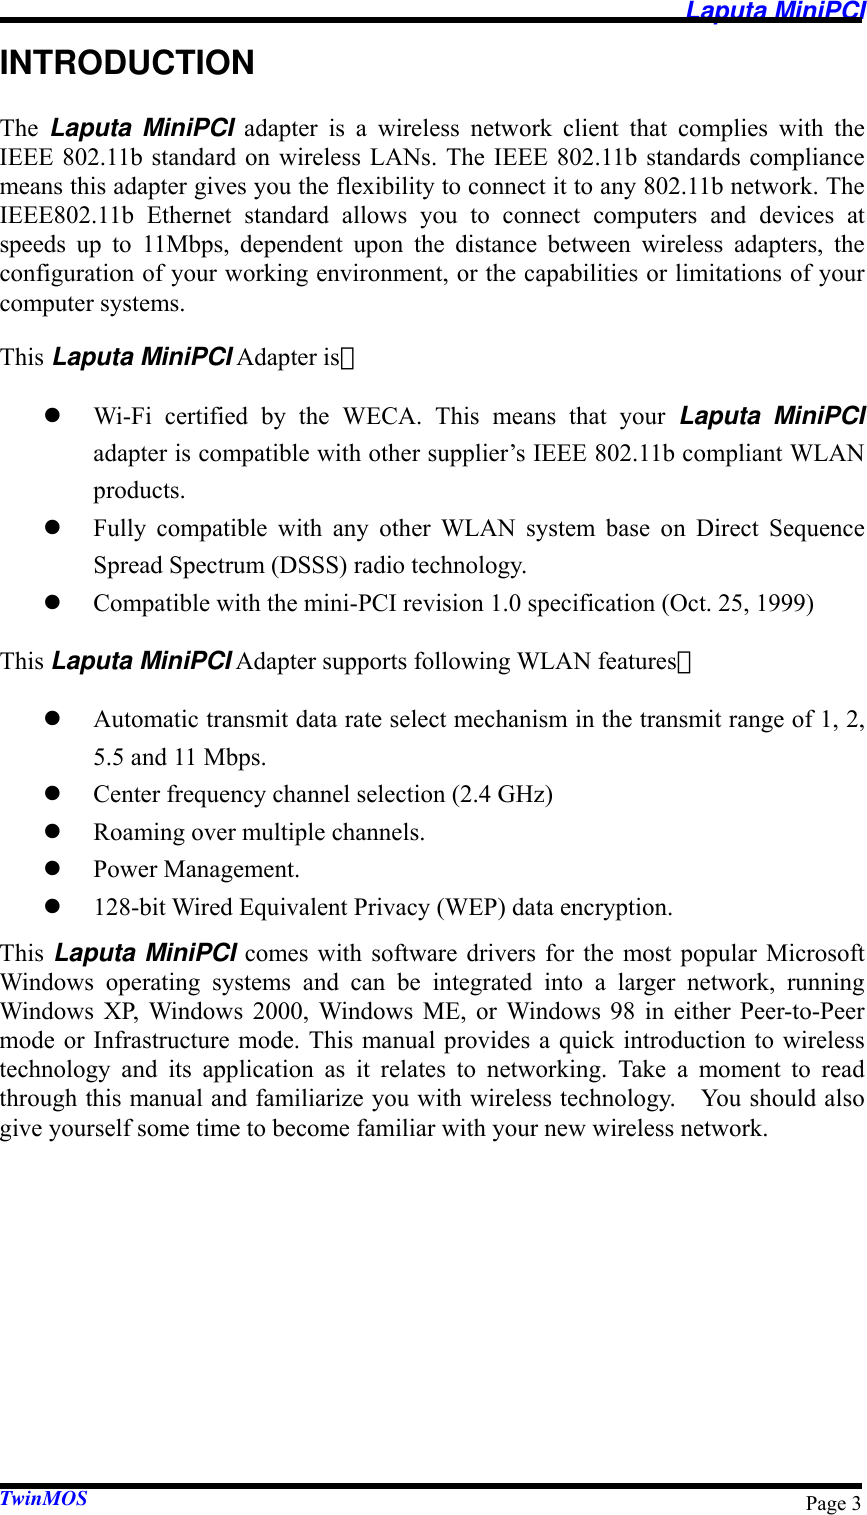   Laputa MiniPCI TwinMOS  Page 3INTRODUCTION The  Laputa MiniPCI adapter is a wireless network client that complies with the IEEE 802.11b standard on wireless LANs. The IEEE 802.11b standards compliance means this adapter gives you the flexibility to connect it to any 802.11b network. The IEEE802.11b Ethernet standard allows you to connect computers and devices at speeds up to 11Mbps, dependent upon the distance between wireless adapters, the configuration of your working environment, or the capabilities or limitations of your computer systems. This Laputa MiniPCI Adapter is： z Wi-Fi certified by the WECA. This means that your Laputa MiniPCI adapter is compatible with other supplier’s IEEE 802.11b compliant WLAN products. z Fully compatible with any other WLAN system base on Direct Sequence Spread Spectrum (DSSS) radio technology. z Compatible with the mini-PCI revision 1.0 specification (Oct. 25, 1999) This Laputa MiniPCI Adapter supports following WLAN features： z Automatic transmit data rate select mechanism in the transmit range of 1, 2, 5.5 and 11 Mbps. z Center frequency channel selection (2.4 GHz) z Roaming over multiple channels. z Power Management. z 128-bit Wired Equivalent Privacy (WEP) data encryption. This  Laputa MiniPCI comes with software drivers for the most popular Microsoft Windows operating systems and can be integrated into a larger network, running Windows XP, Windows 2000, Windows ME, or Windows 98 in either Peer-to-Peer mode or Infrastructure mode. This manual provides a quick introduction to wireless technology and its application as it relates to networking. Take a moment to read through this manual and familiarize you with wireless technology.    You should also give yourself some time to become familiar with your new wireless network. 